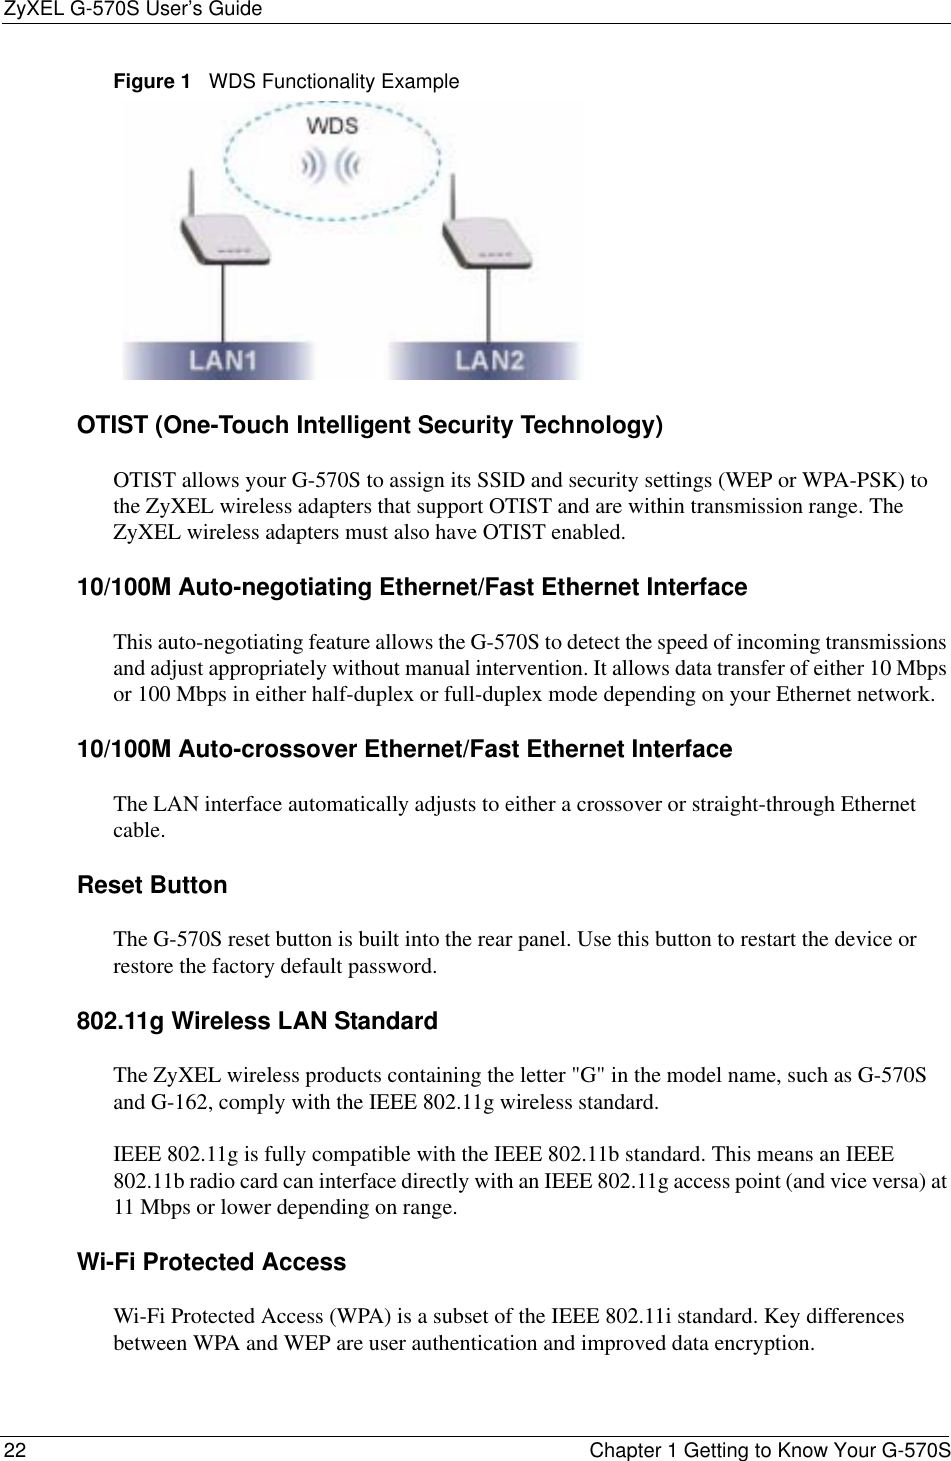 ZyXEL G-570S User’s Guide22 Chapter 1 Getting to Know Your G-570SFigure 1   WDS Functionality ExampleOTIST (One-Touch Intelligent Security Technology)OTIST allows your G-570S to assign its SSID and security settings (WEP or WPA-PSK) to the ZyXEL wireless adapters that support OTIST and are within transmission range. The ZyXEL wireless adapters must also have OTIST enabled.10/100M Auto-negotiating Ethernet/Fast Ethernet InterfaceThis auto-negotiating feature allows the G-570S to detect the speed of incoming transmissions and adjust appropriately without manual intervention. It allows data transfer of either 10 Mbps or 100 Mbps in either half-duplex or full-duplex mode depending on your Ethernet network.10/100M Auto-crossover Ethernet/Fast Ethernet InterfaceThe LAN interface automatically adjusts to either a crossover or straight-through Ethernet cable.Reset ButtonThe G-570S reset button is built into the rear panel. Use this button to restart the device or restore the factory default password. 802.11g Wireless LAN StandardThe ZyXEL wireless products containing the letter &quot;G&quot; in the model name, such as G-570S and G-162, comply with the IEEE 802.11g wireless standard.IEEE 802.11g is fully compatible with the IEEE 802.11b standard. This means an IEEE 802.11b radio card can interface directly with an IEEE 802.11g access point (and vice versa) at 11 Mbps or lower depending on range. Wi-Fi Protected AccessWi-Fi Protected Access (WPA) is a subset of the IEEE 802.11i standard. Key differences between WPA and WEP are user authentication and improved data encryption.